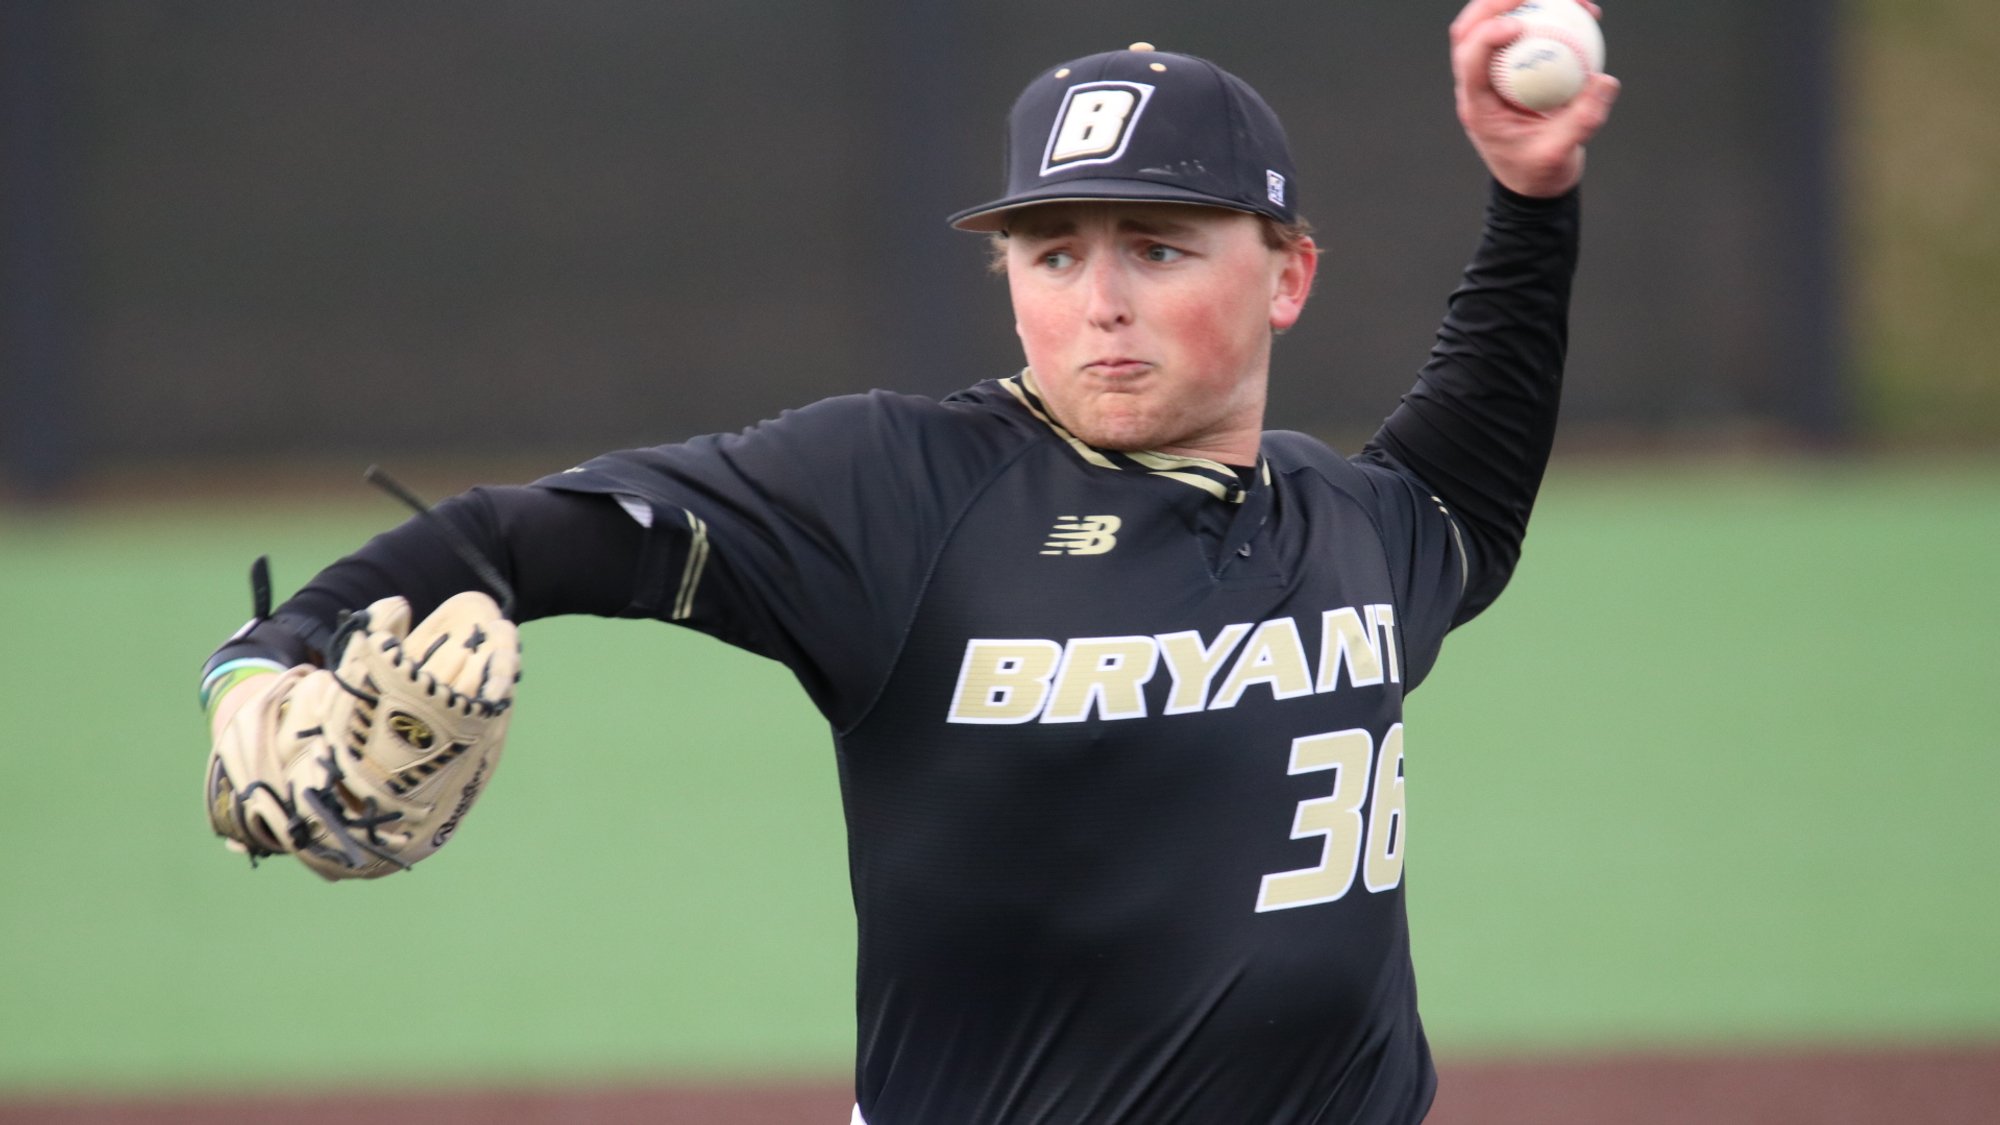 Bryant, Maine open America East play at Conaty Park